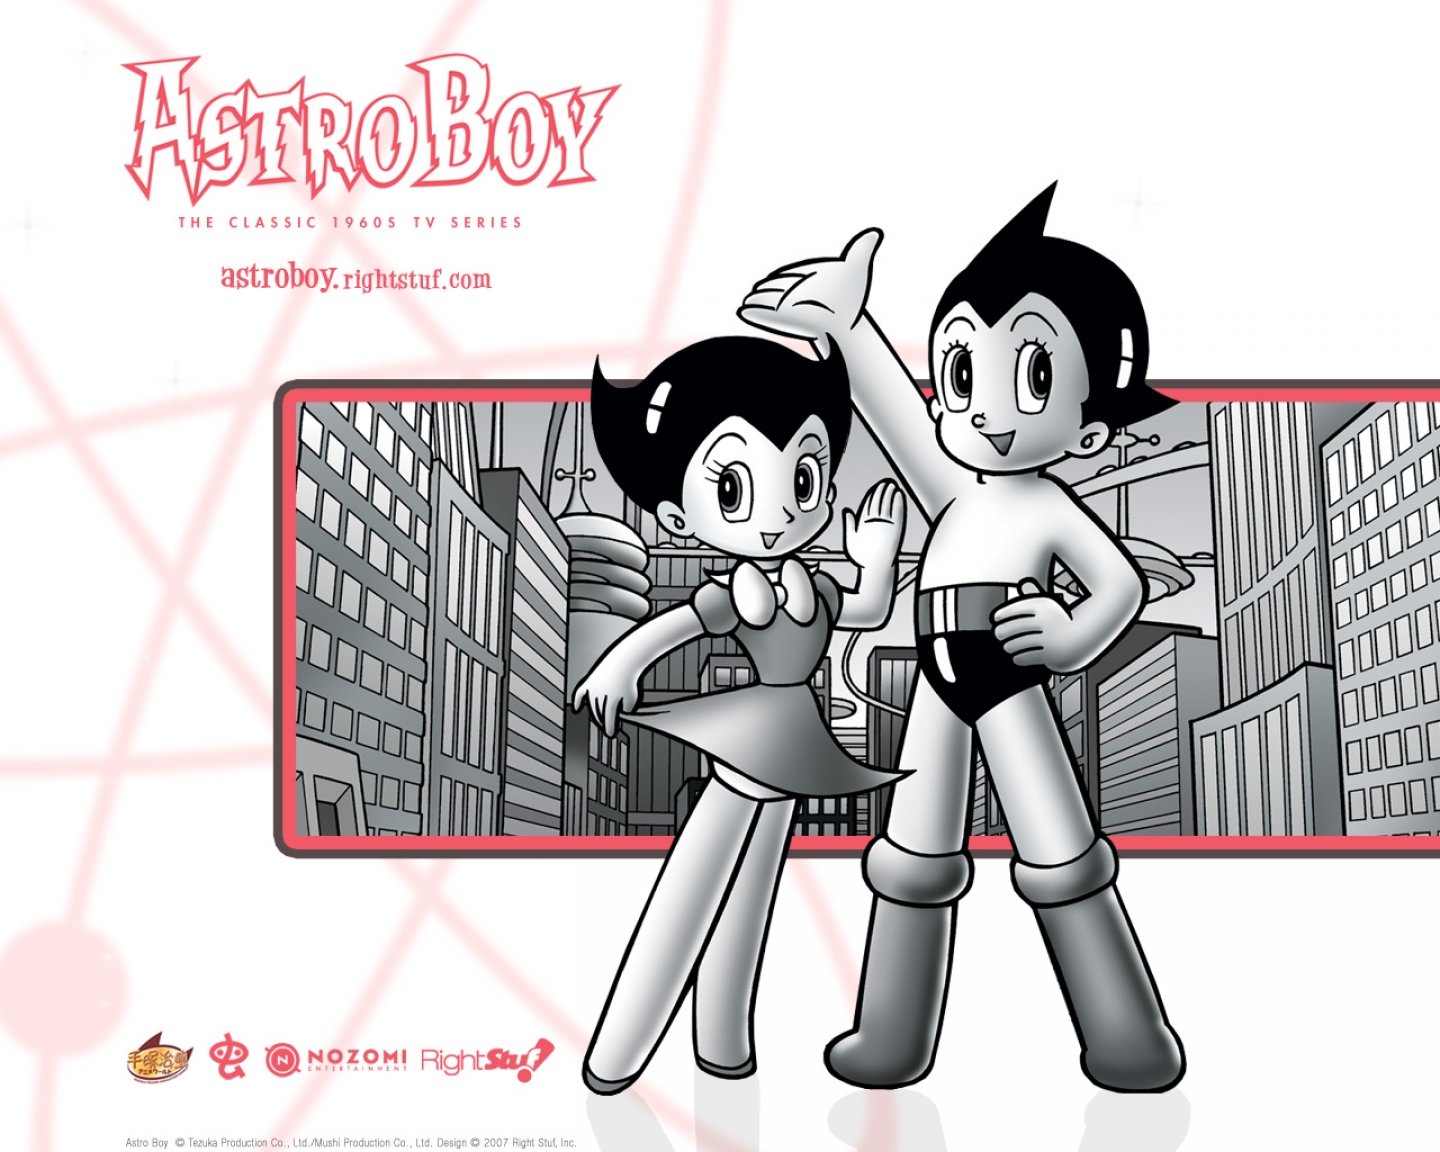 Classic Anime Series 'Astroboy' Is Receiving a Reboot | Hypebeast